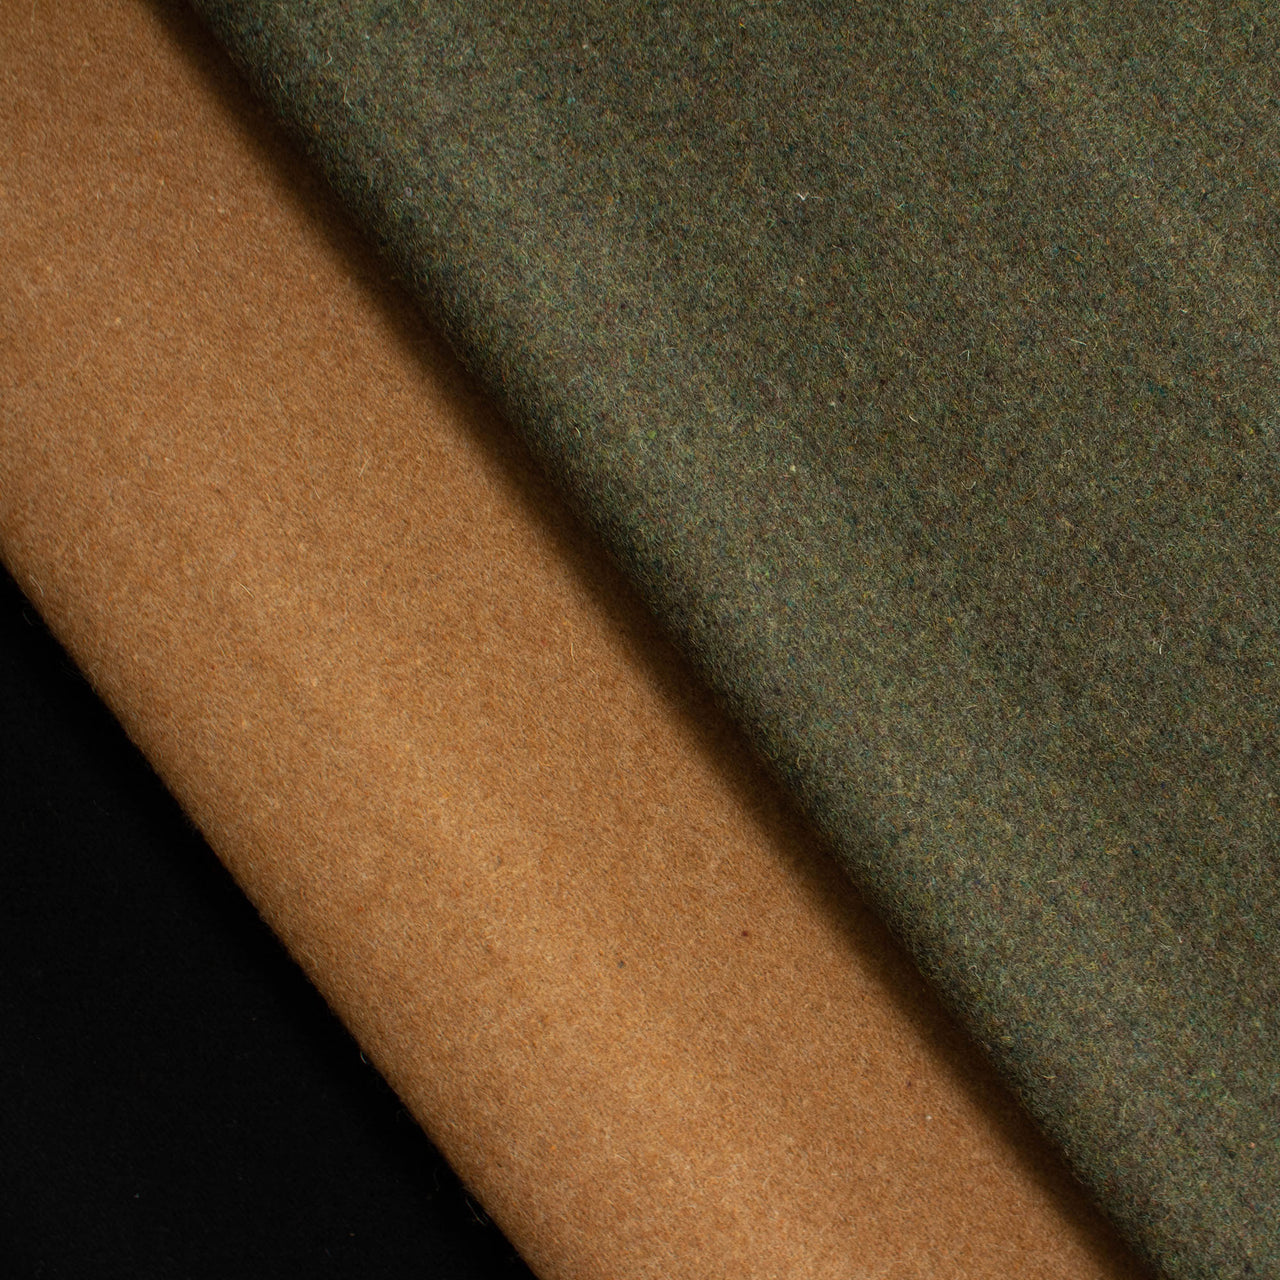 Melton Wool Fabric -  Soft and Warm Fabric for Coats, Clothing and Blankets